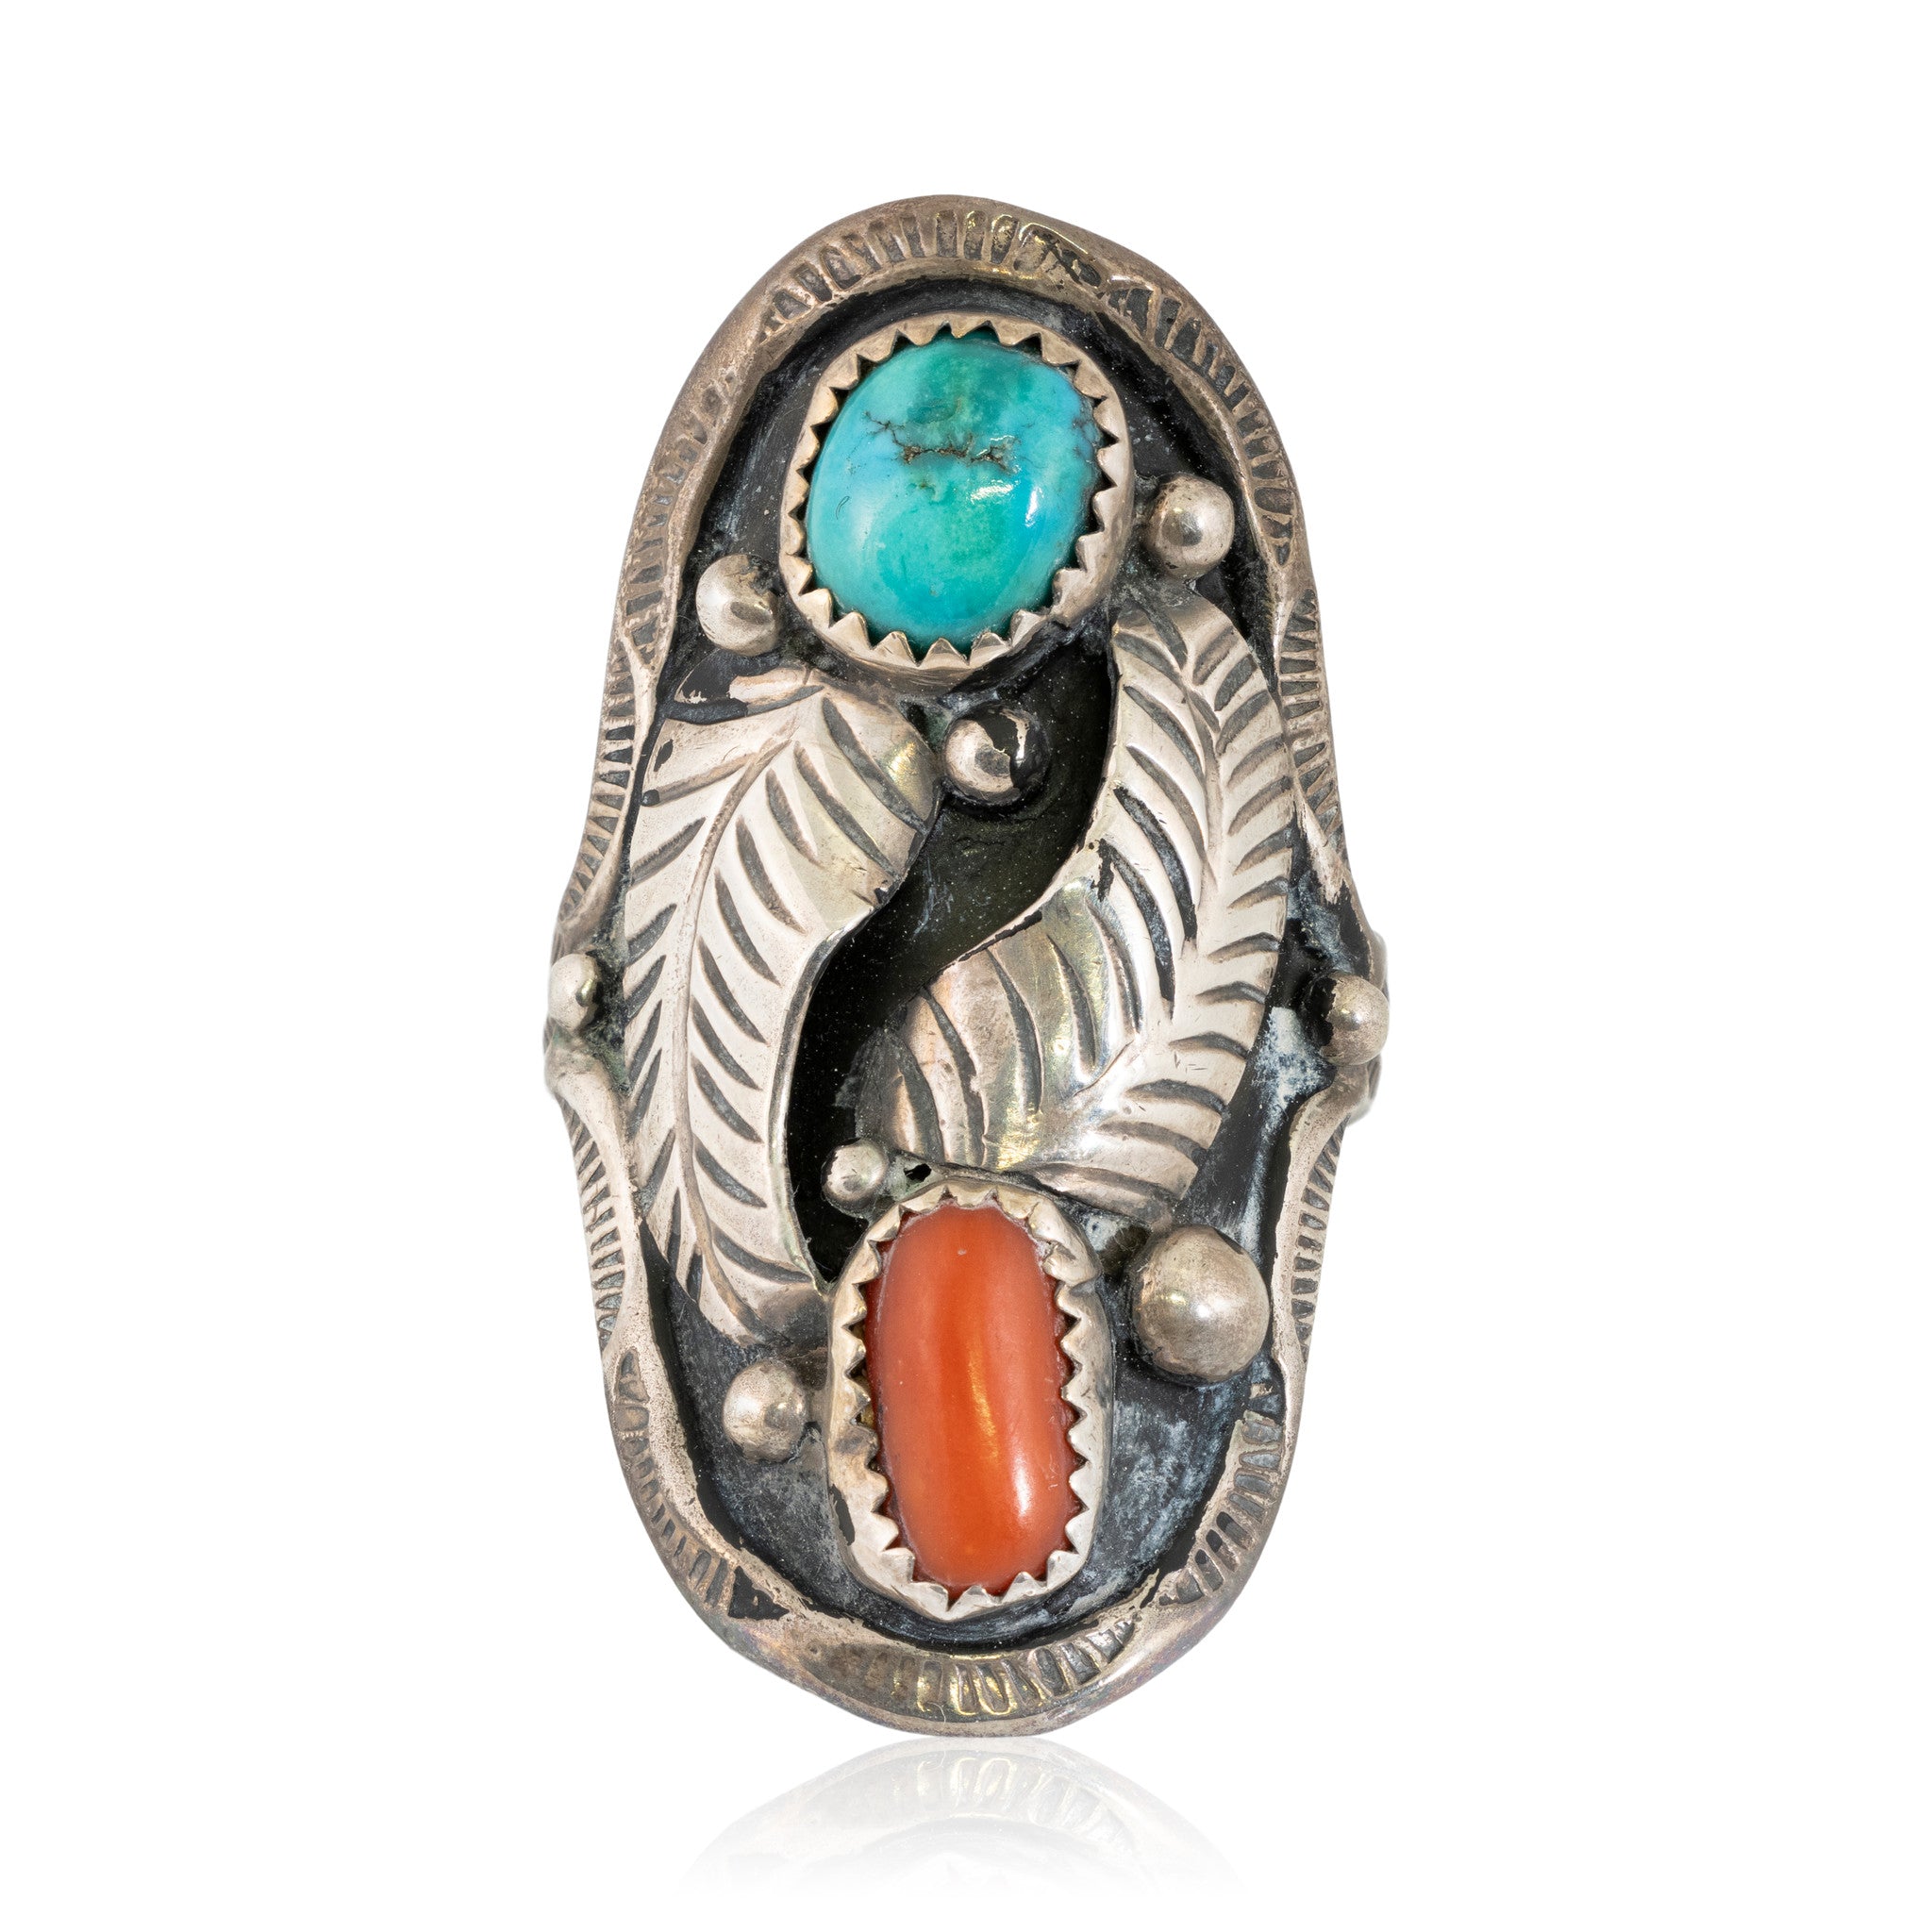 Navajo Turquoise and Coral Ring, Jewelry, Ring, Native